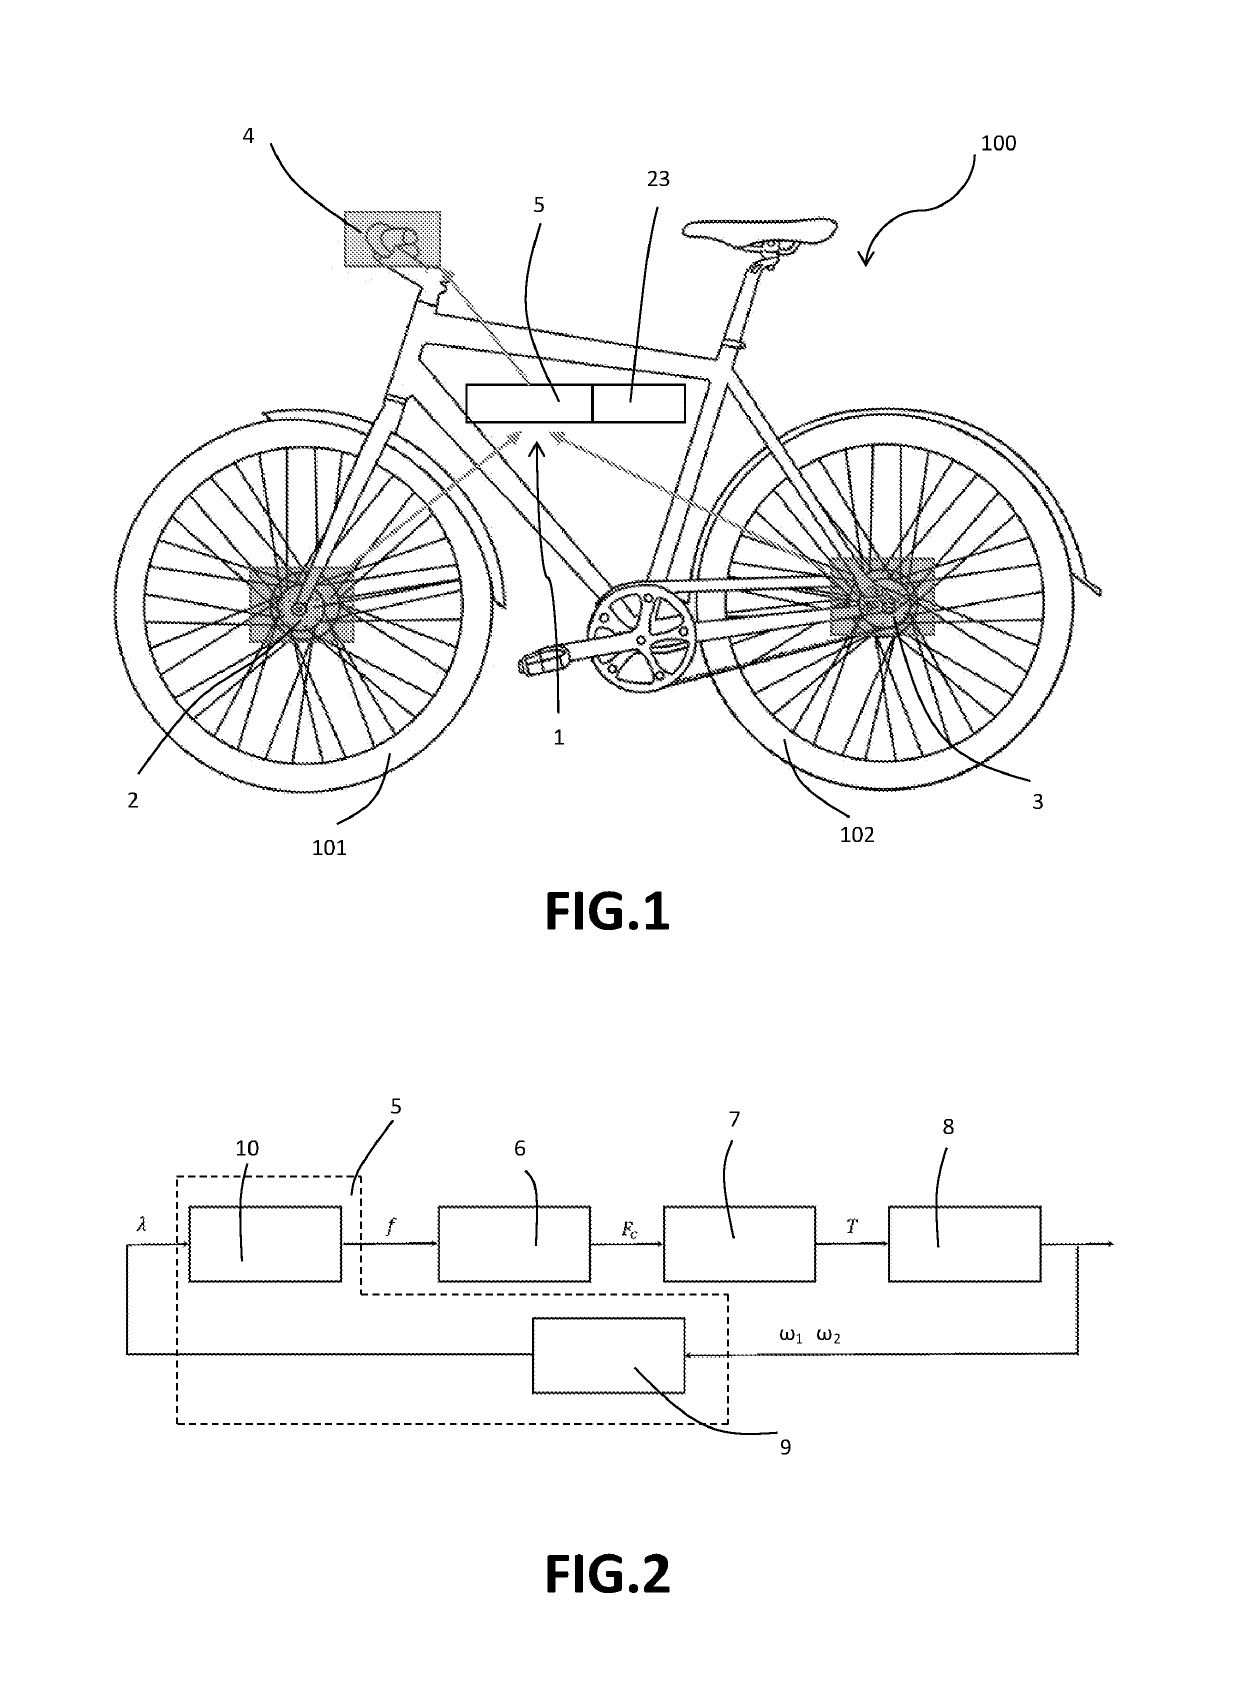 Brake assist system for a cyclist on a bicycle by a haptic feedback